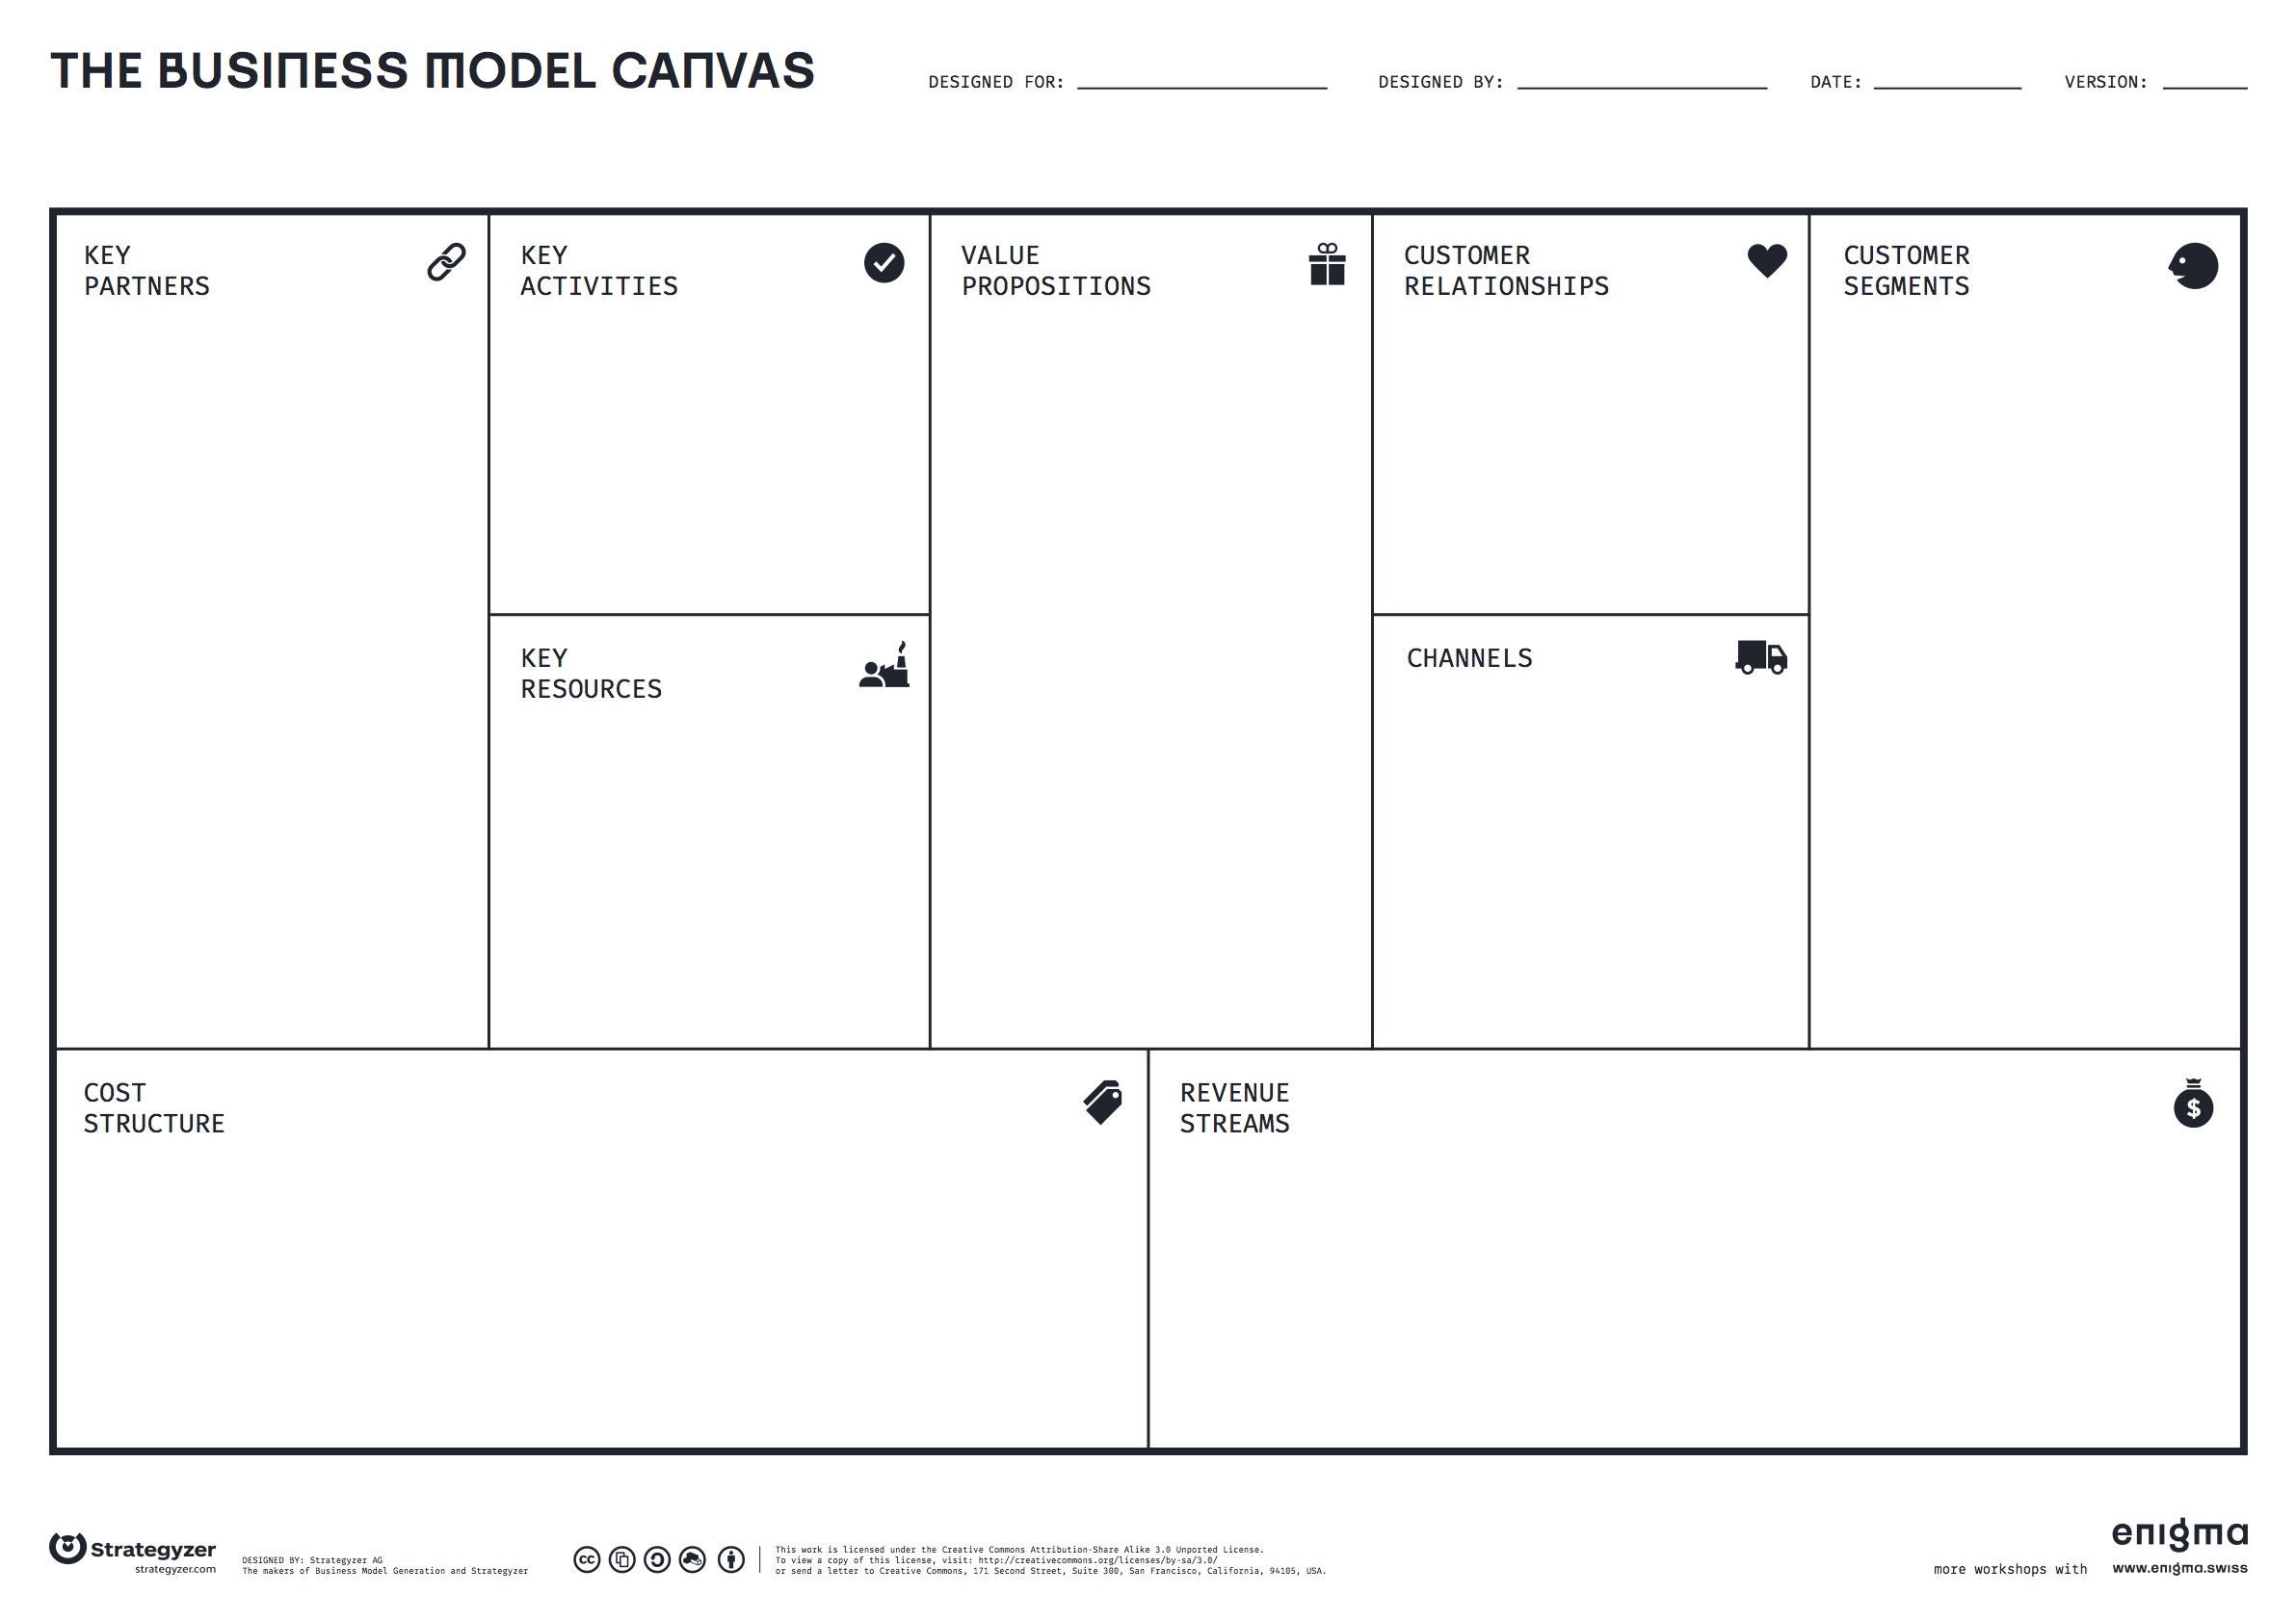 The business model canvas A1 Enigma TOOL 160607